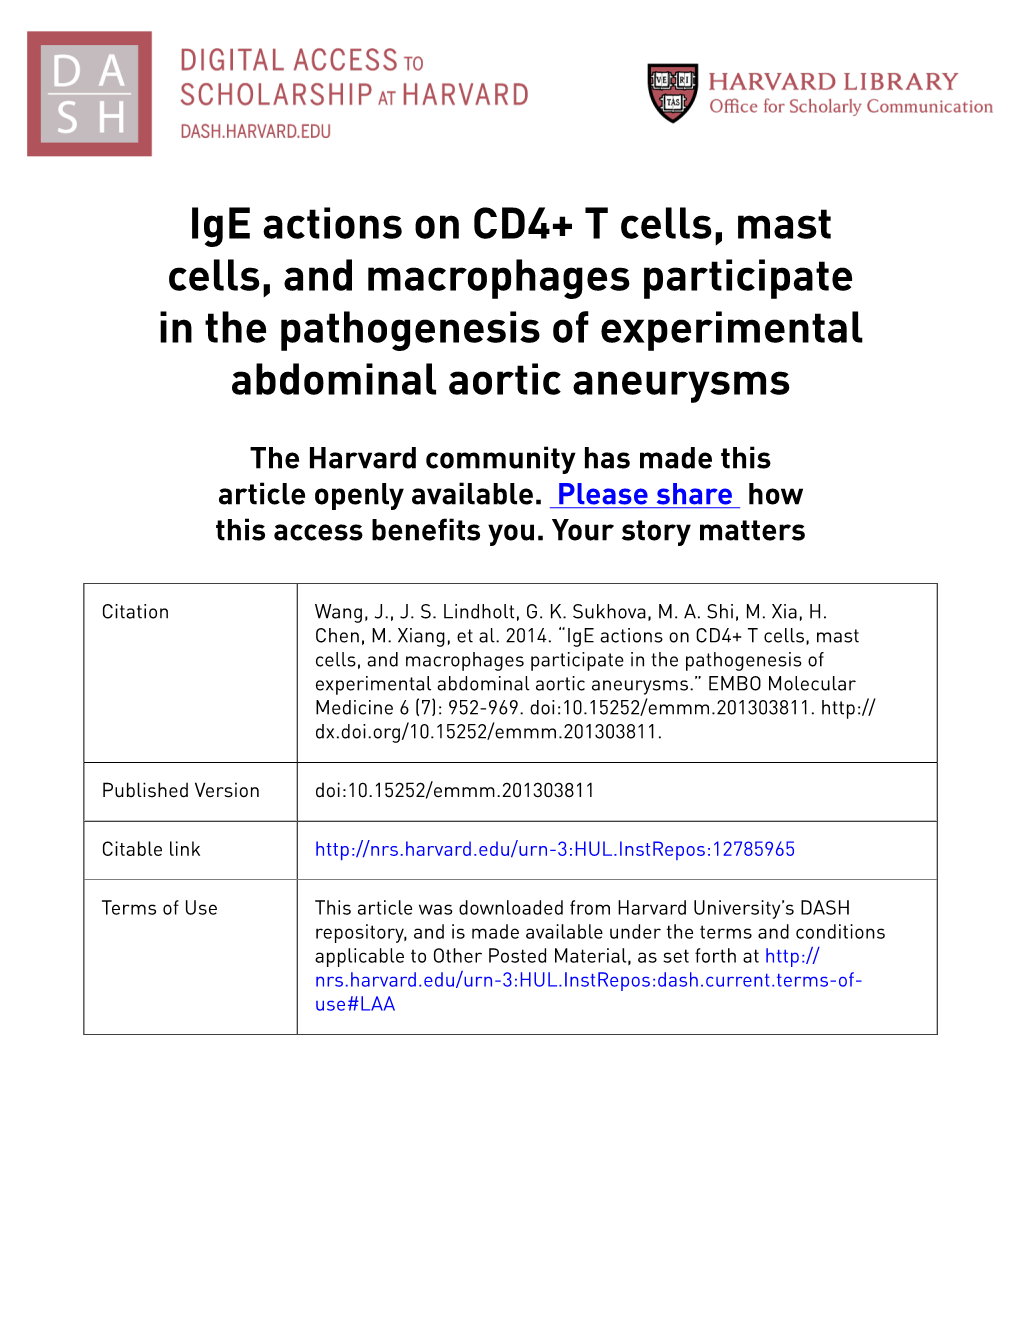 Ige Actions on CD4 T Cells, Mast Cells, and Macrophages Participate in The